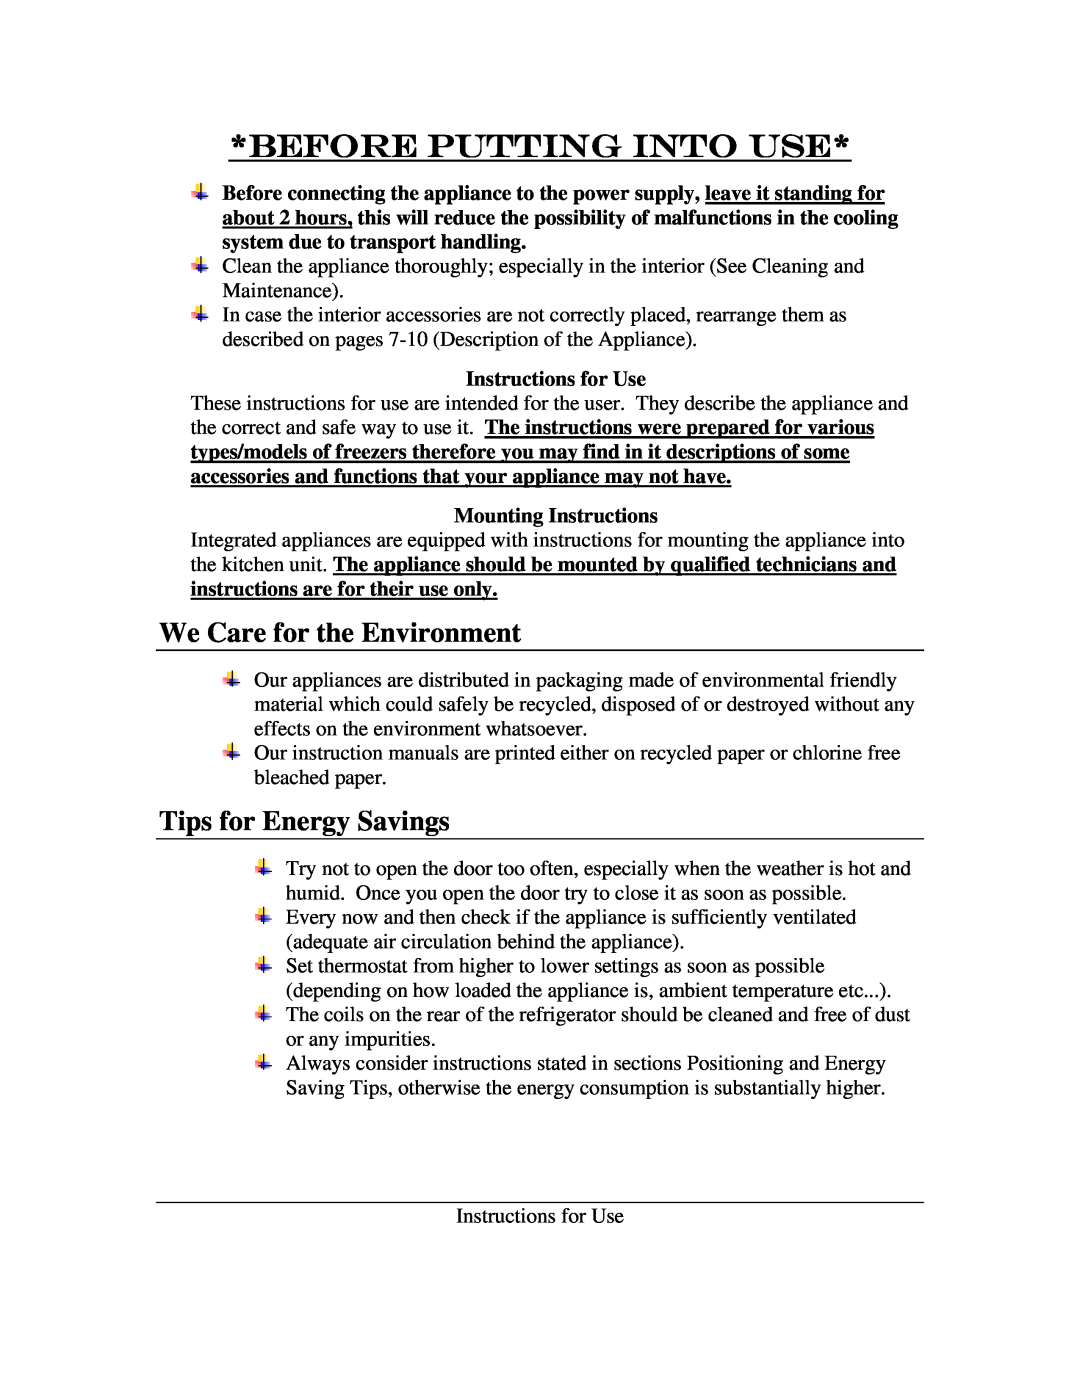 Summit SCFF-55 Before Putting Into UsE, We Care for the Environment, Tips for Energy Savings, Instructions for Use 